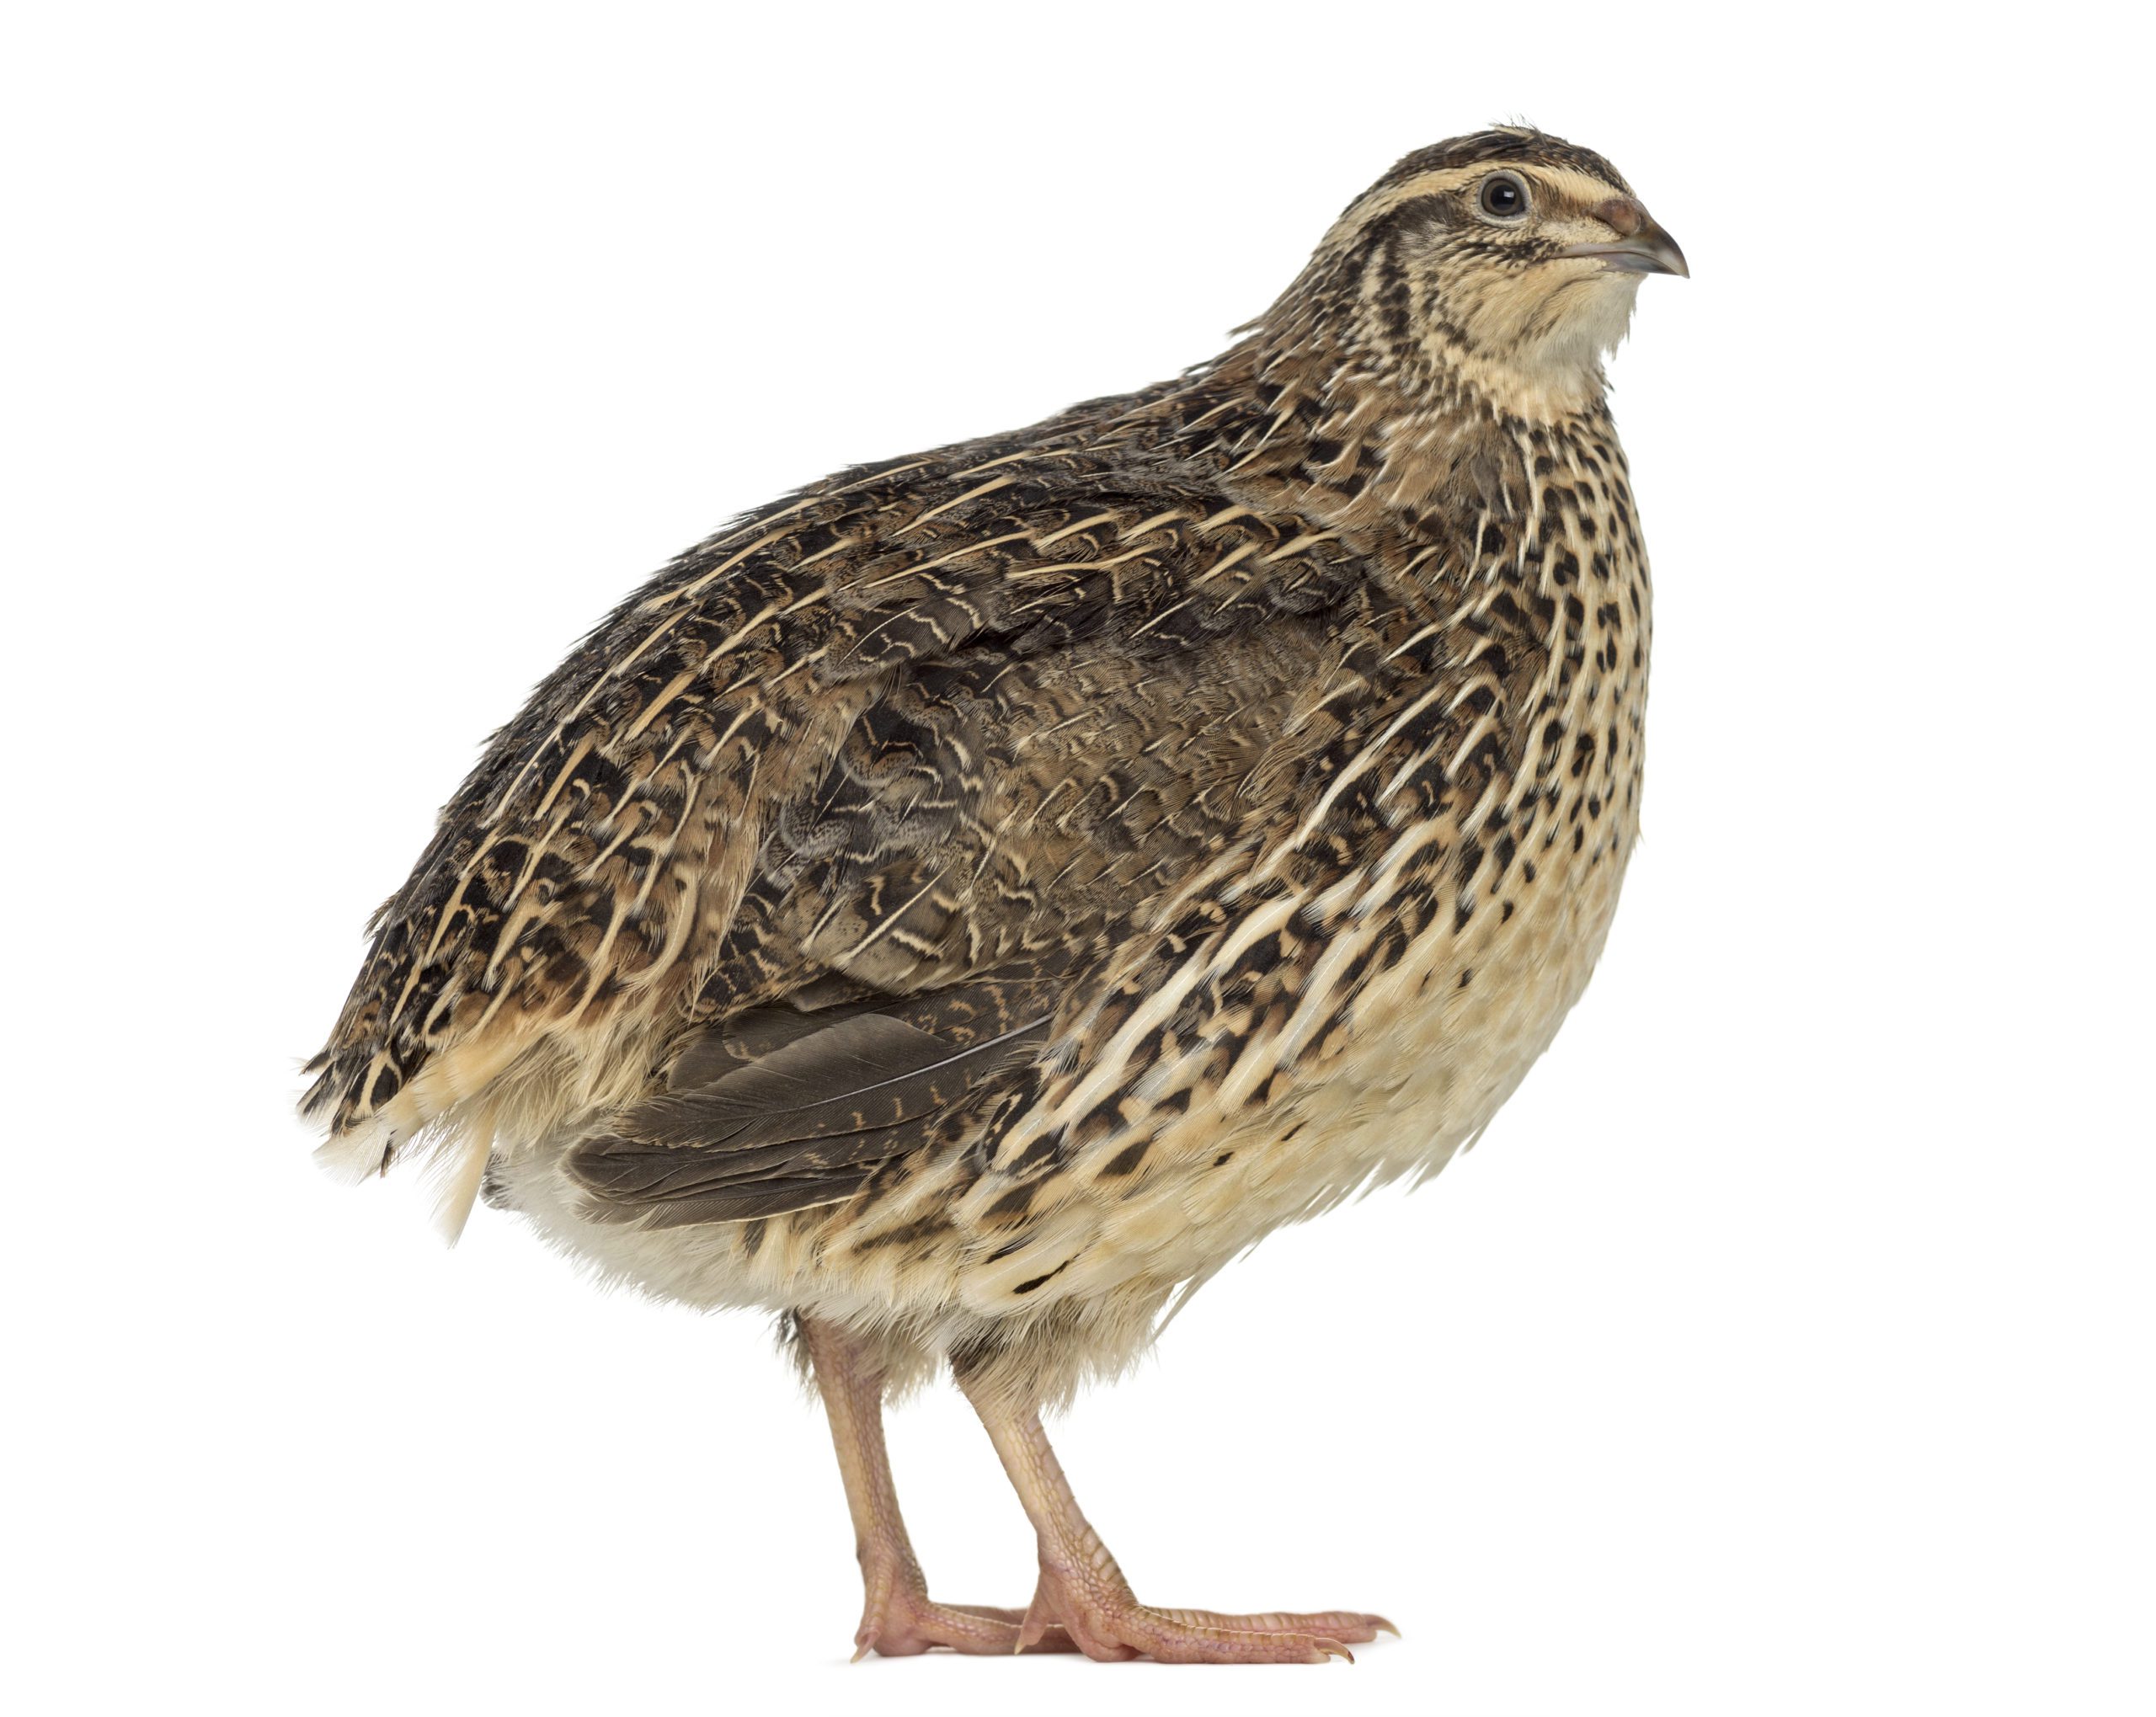 Japanese Quail (Coturnix Japonica) isolated on white.